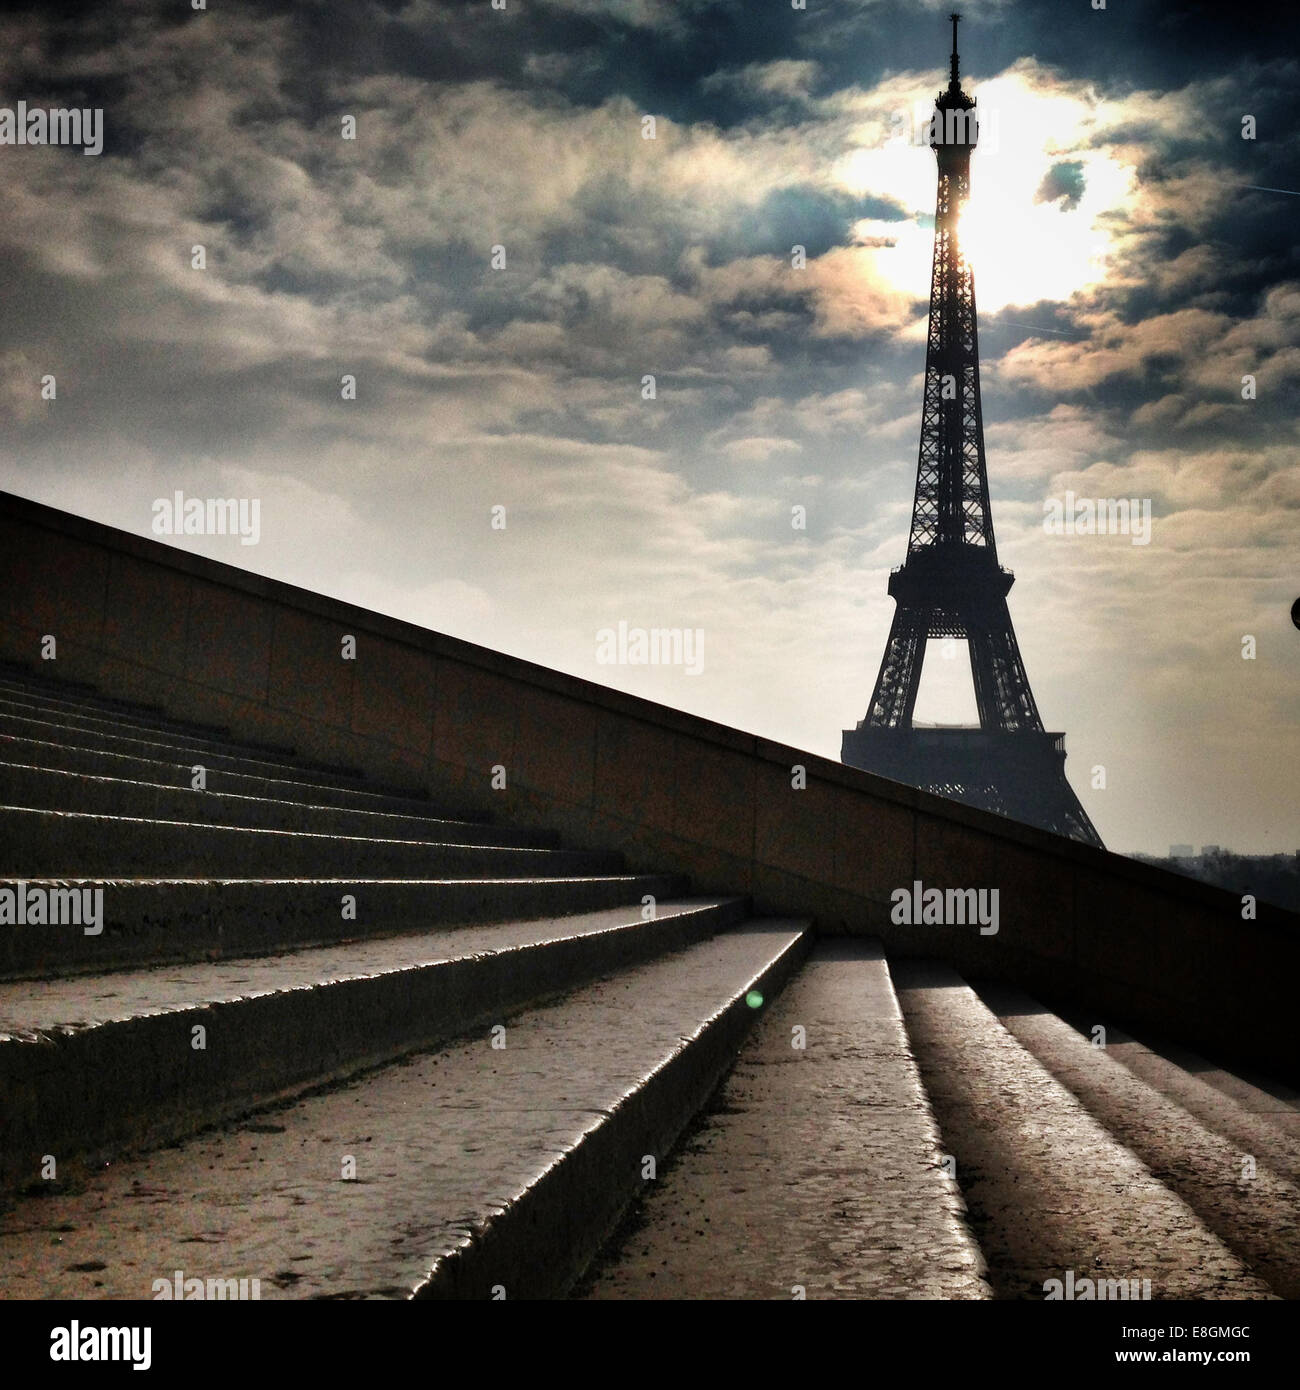 France, Paris, Eiffel Tower seen from steps Stock Photo